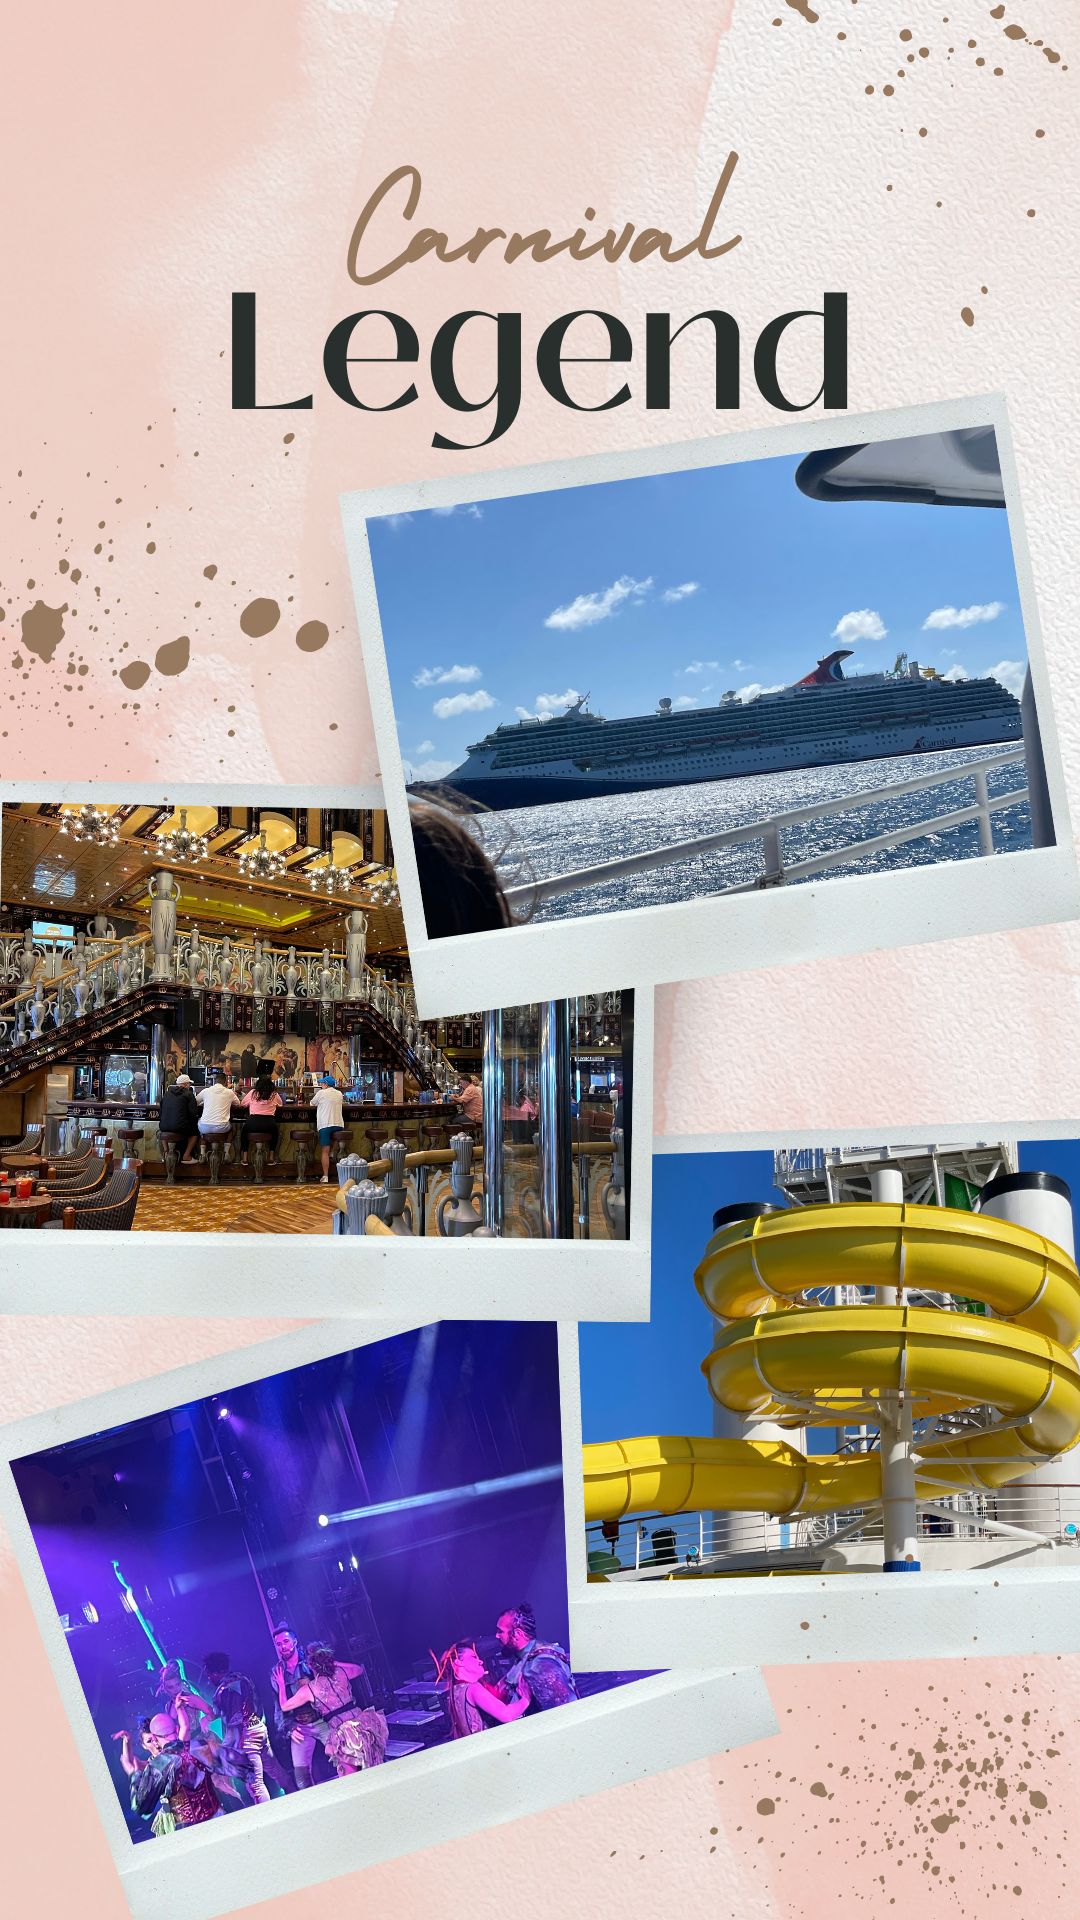 Discover the Magic of Cruising on the Carnival Legend